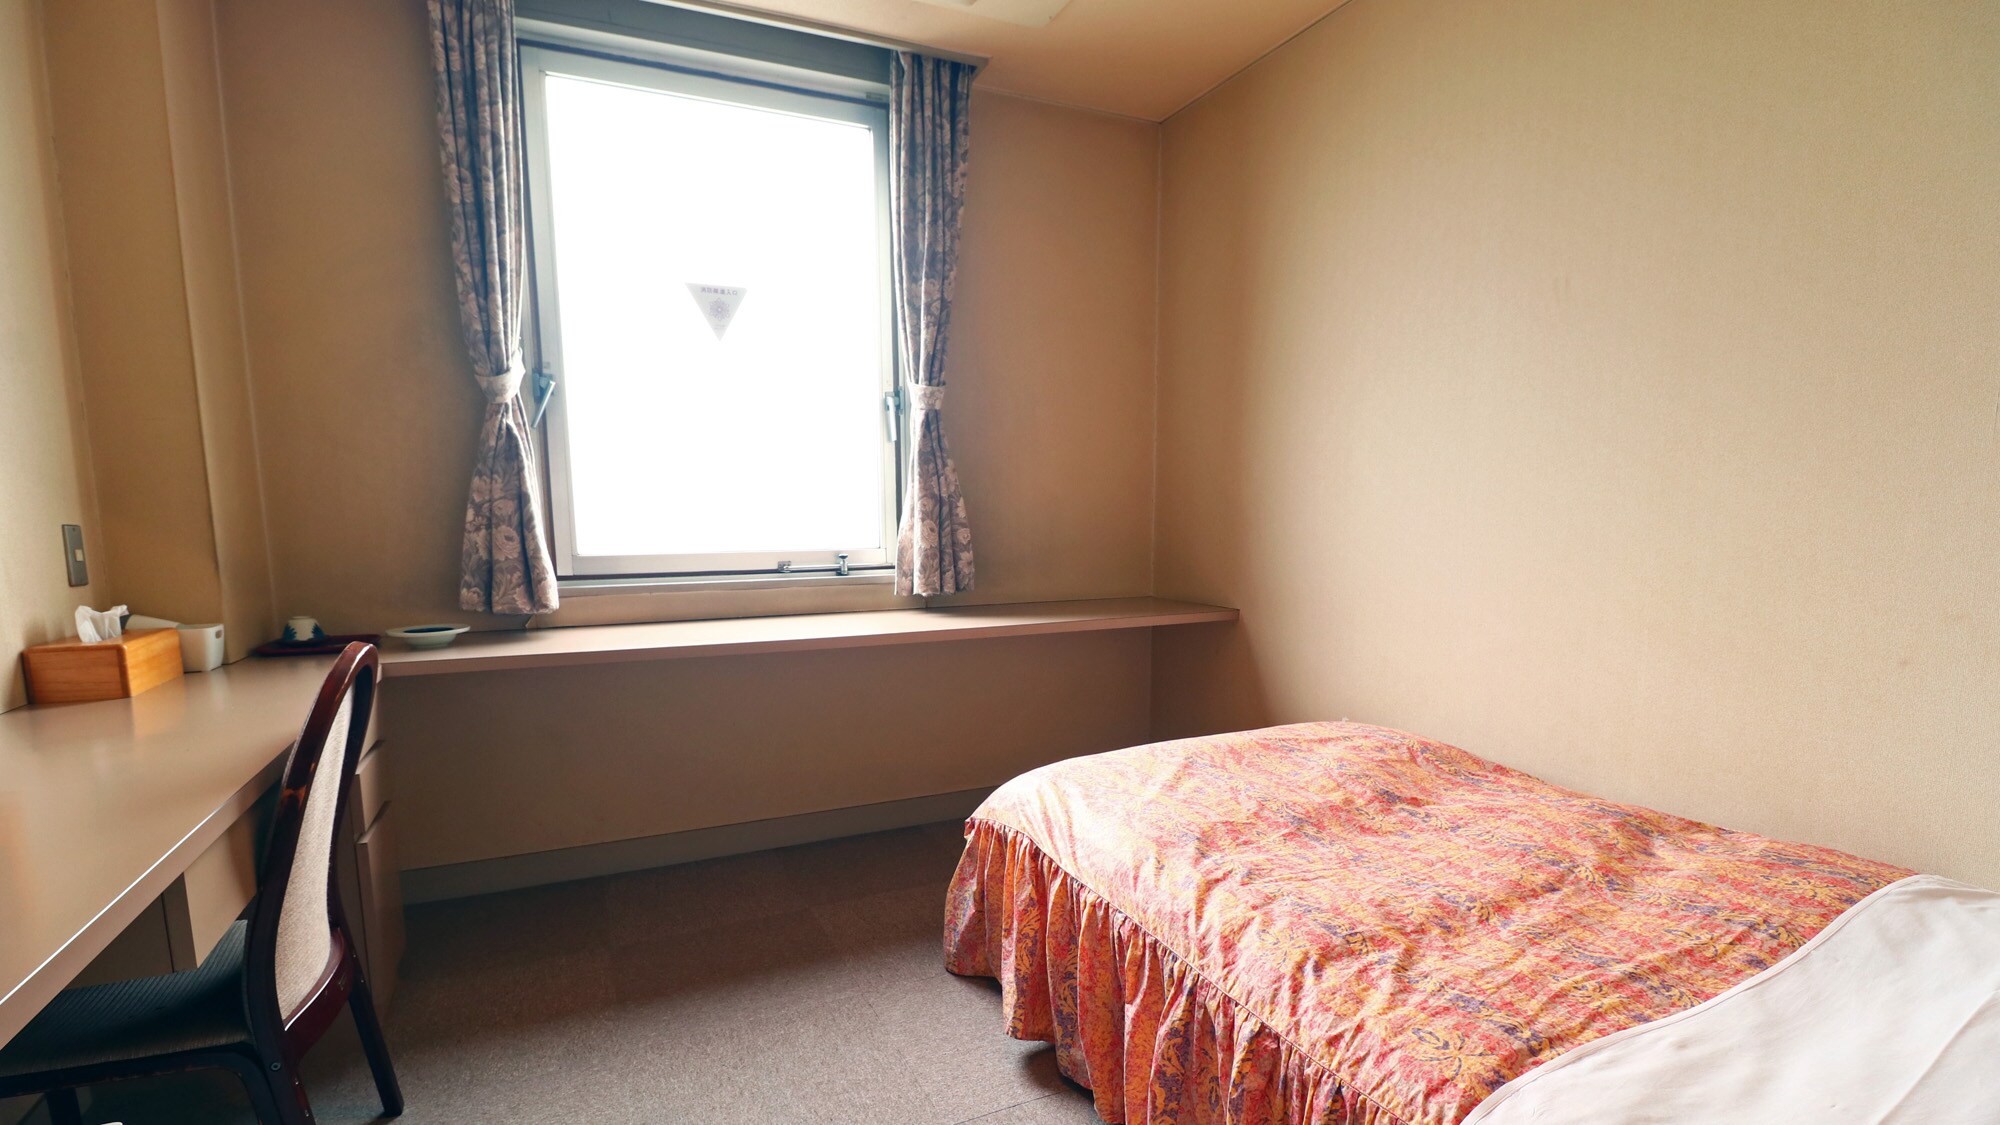 #One example of guest room _ [Single] A spacious room with calm colors. There is a refrigerator and a tea set.